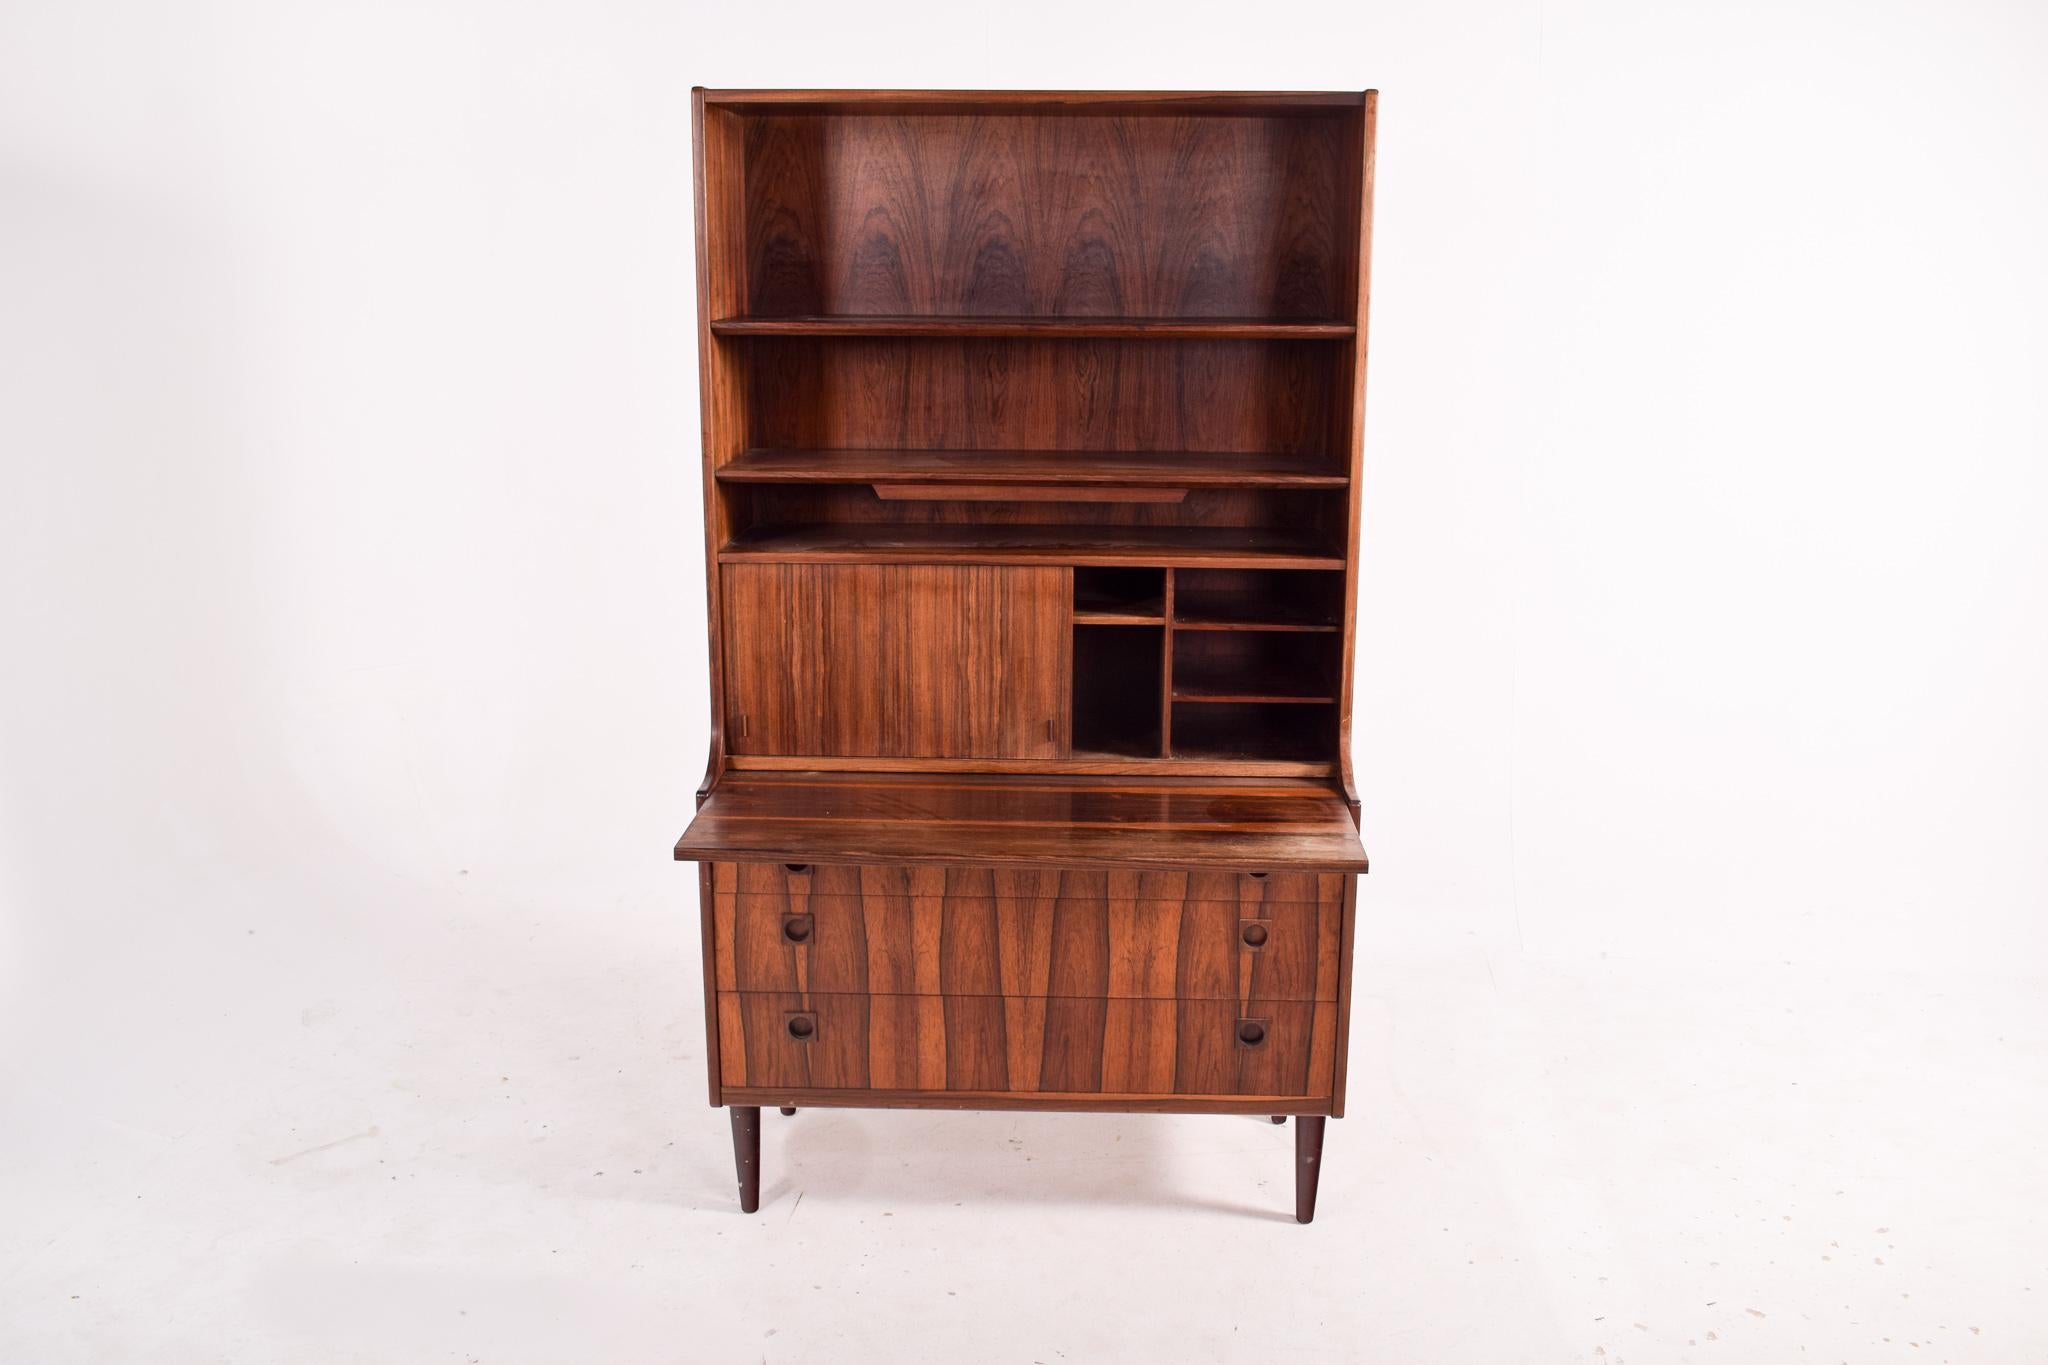 Danish Rosewood Desk and Bookcase with Sliding Doors, 1950 For Sale 1